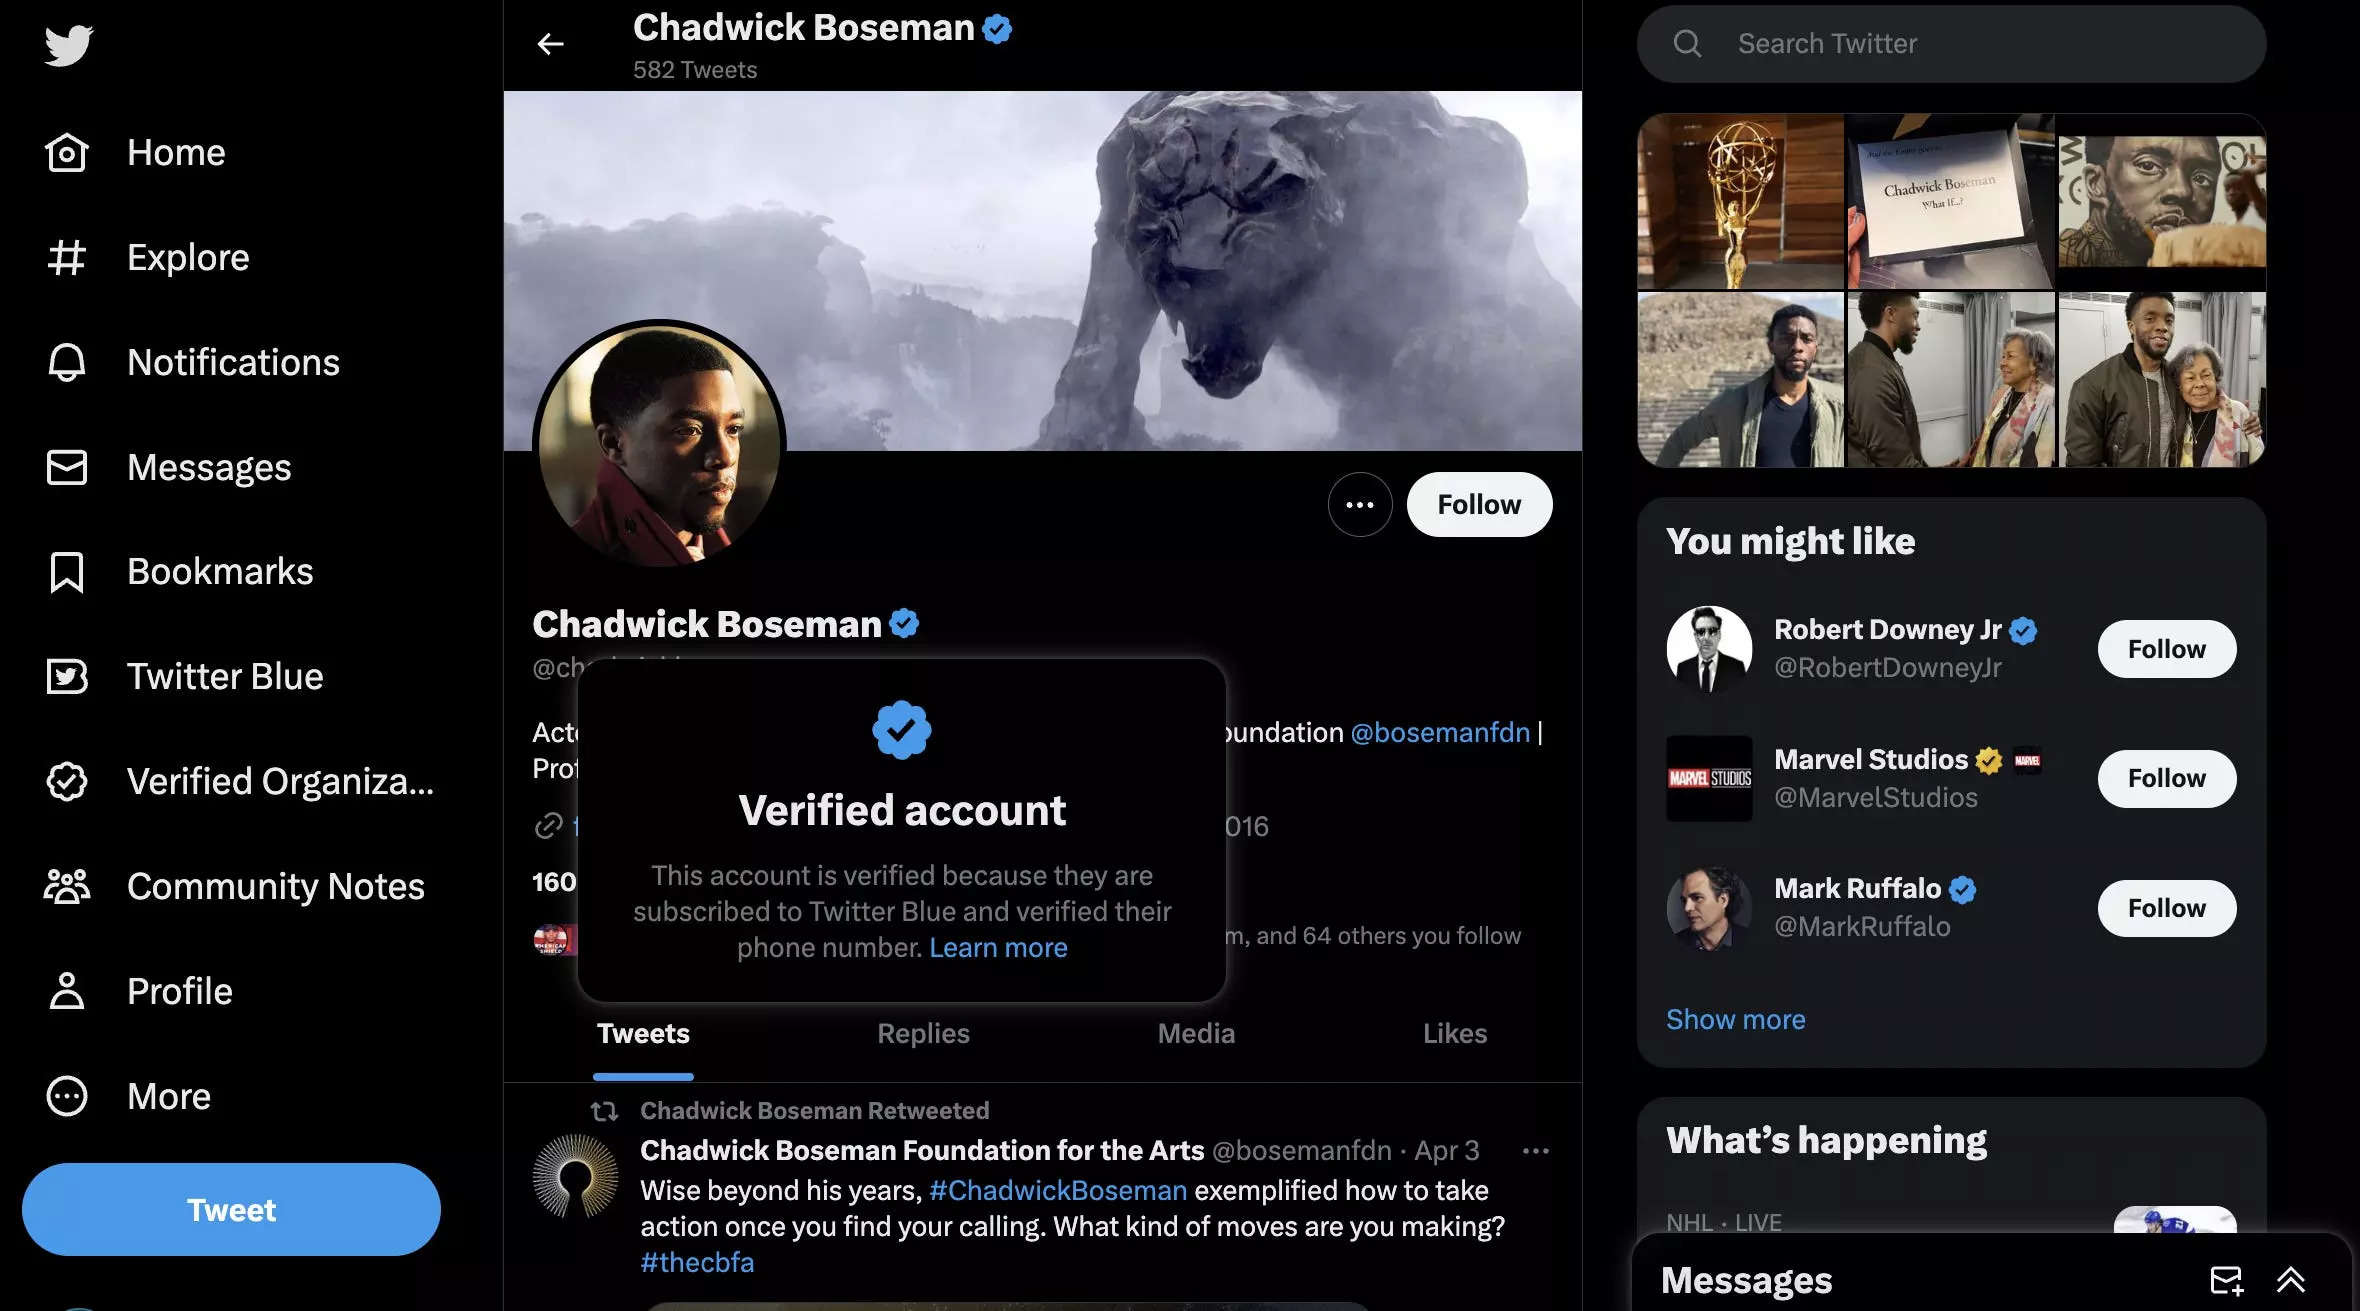 Twitter is adding verified check marks to the accounts of dead celebrities, making them look like paid Twitter Blue subscribers